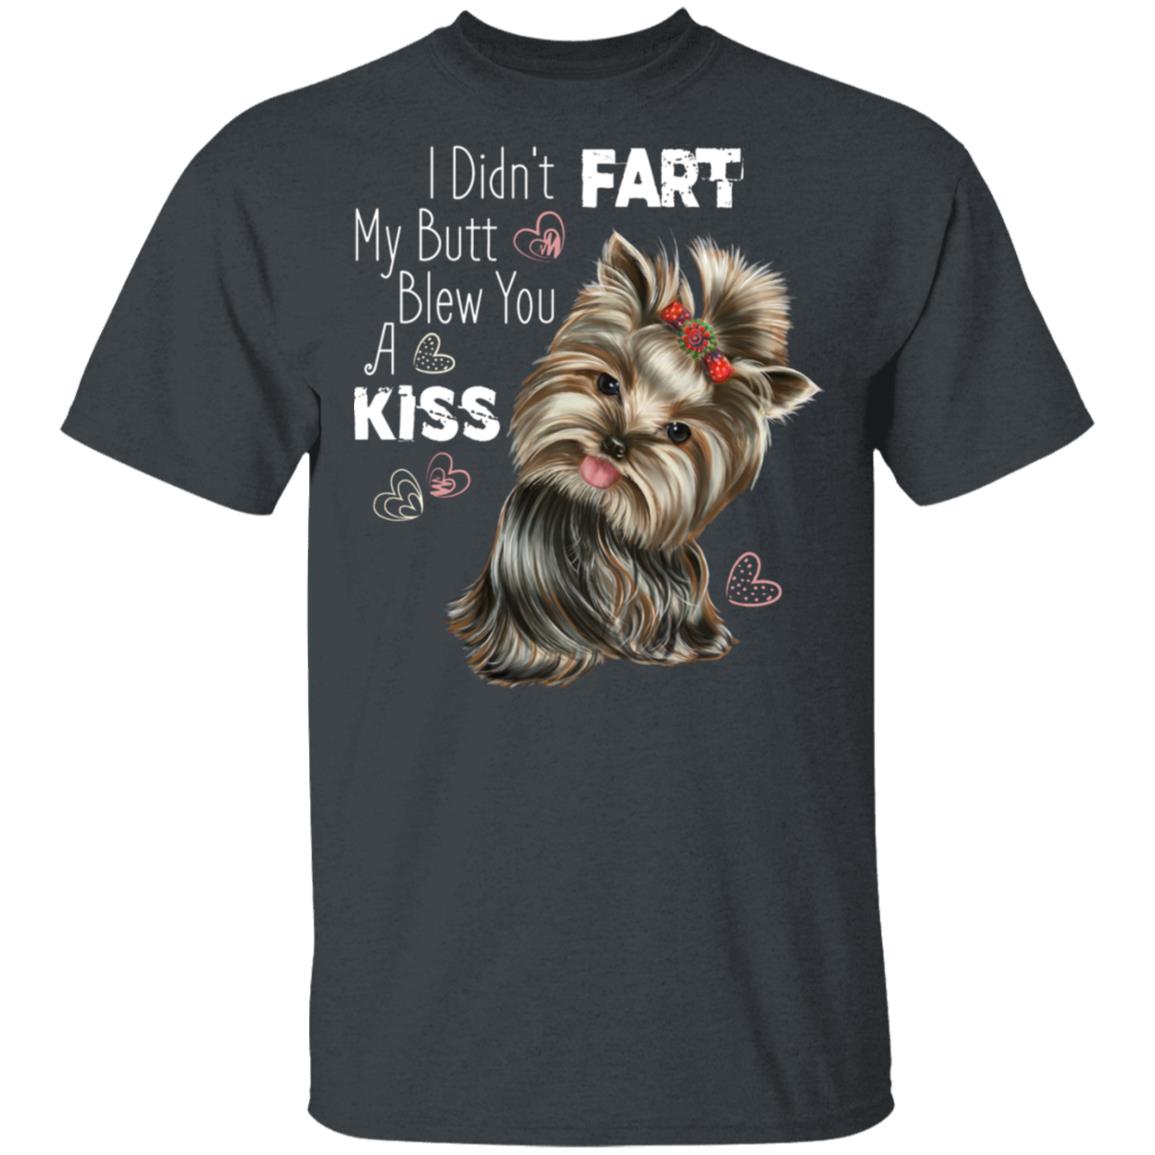 Yorkie shirt, I Didn't Fart My butt Blew You A Kiss, funny T-Shirt - GoneBold.gift